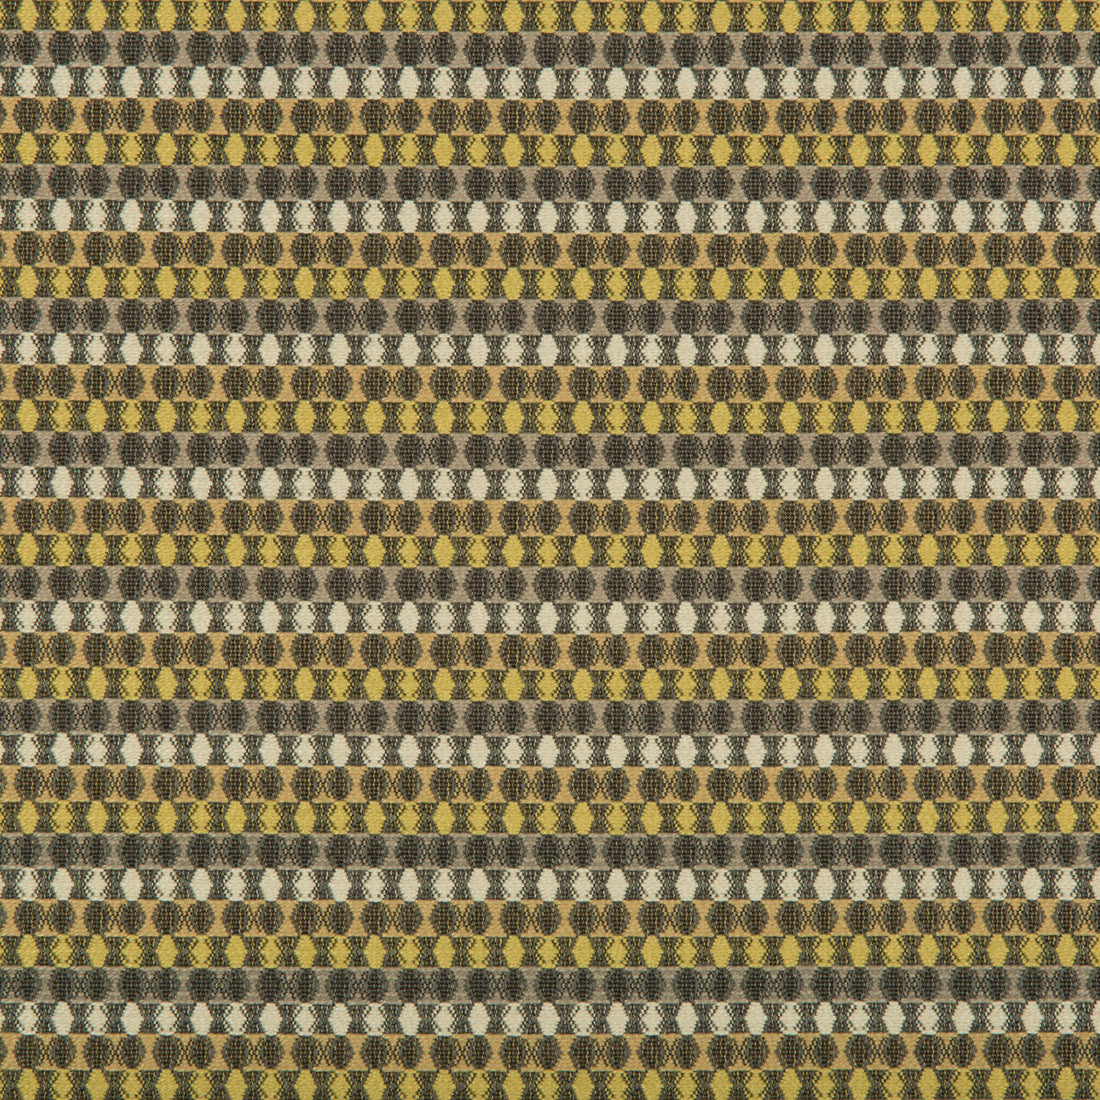 Role Model fabric in lotus color - pattern 35092.13.0 - by Kravet Contract in the Gis Crypton collection